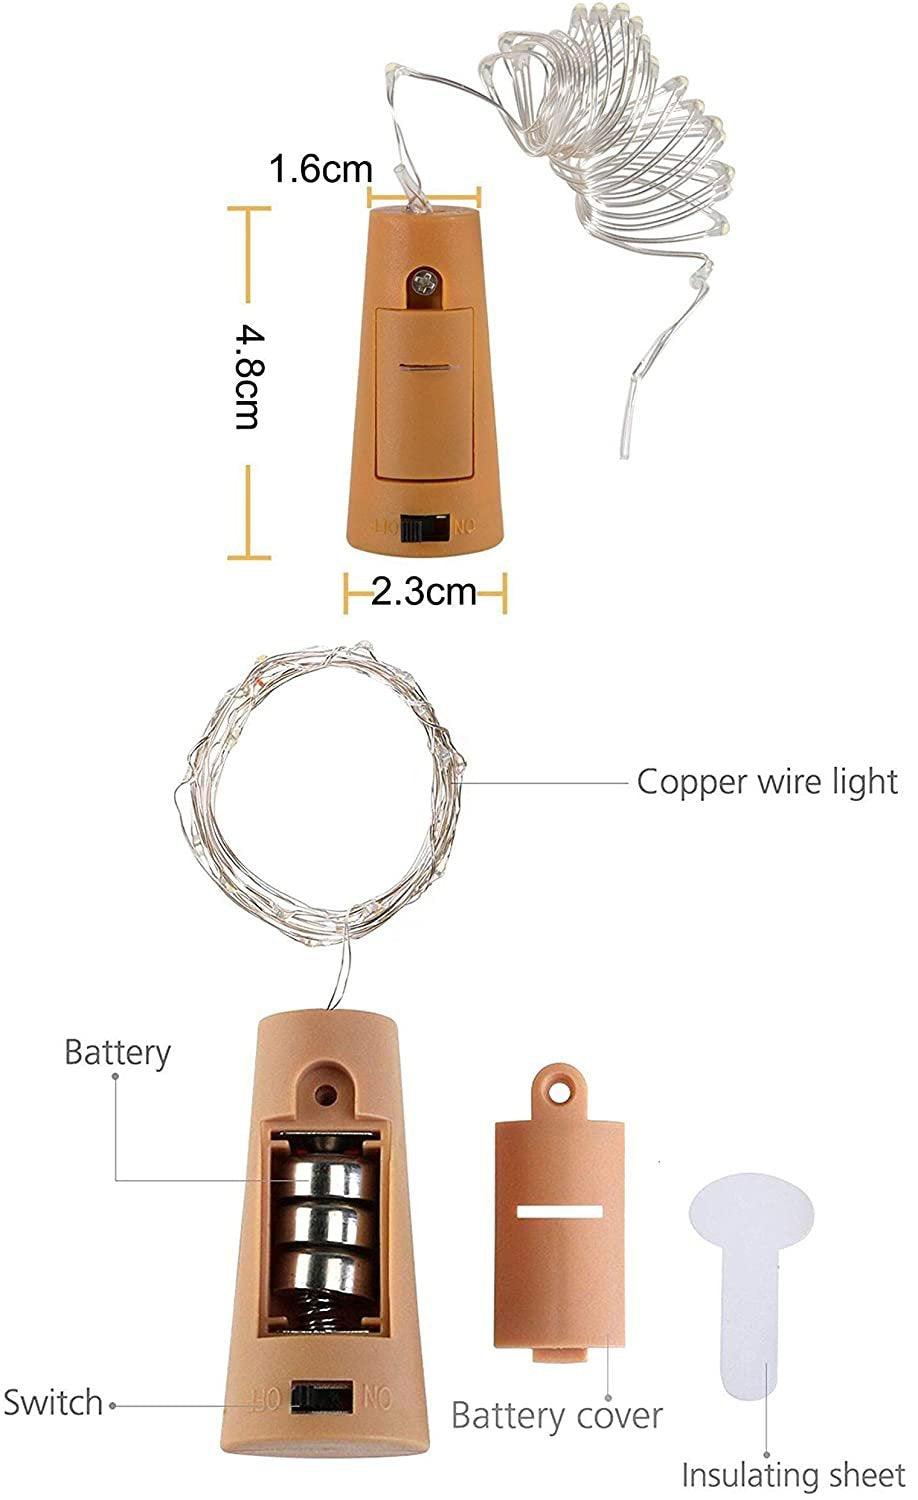 Wine Bottle Cork Lights Cork Shape Copper Wire Colorful Fairy Mini String Lights - If you say i do